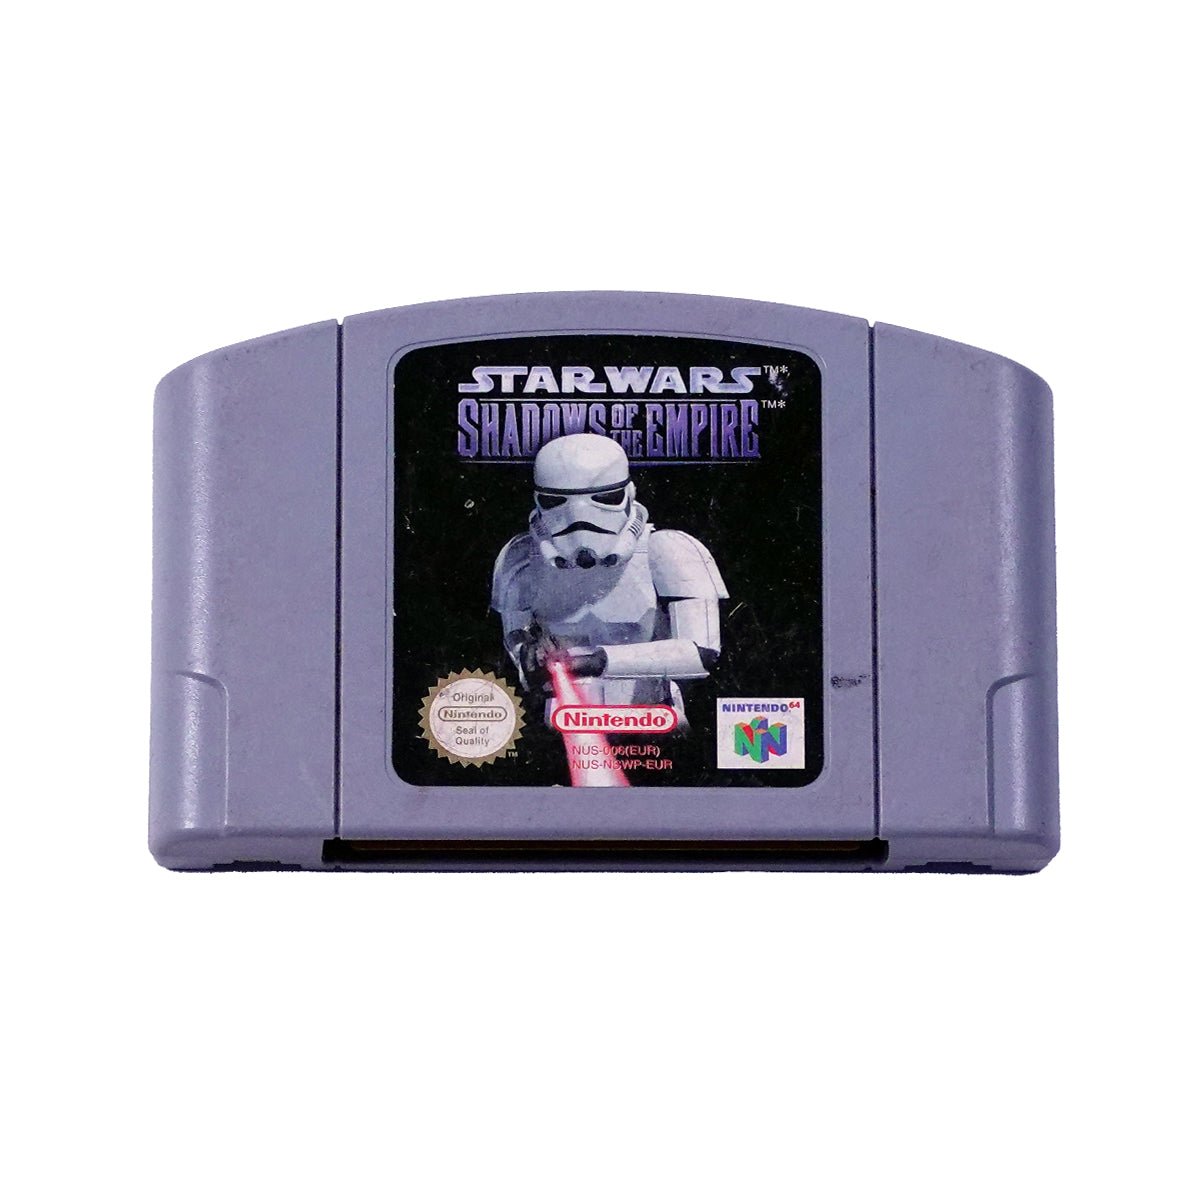 (Pre-Owned) Star Wars Shadows Of The Empire - Nintendo 64 Game - ريترو - Store 974 | ستور ٩٧٤